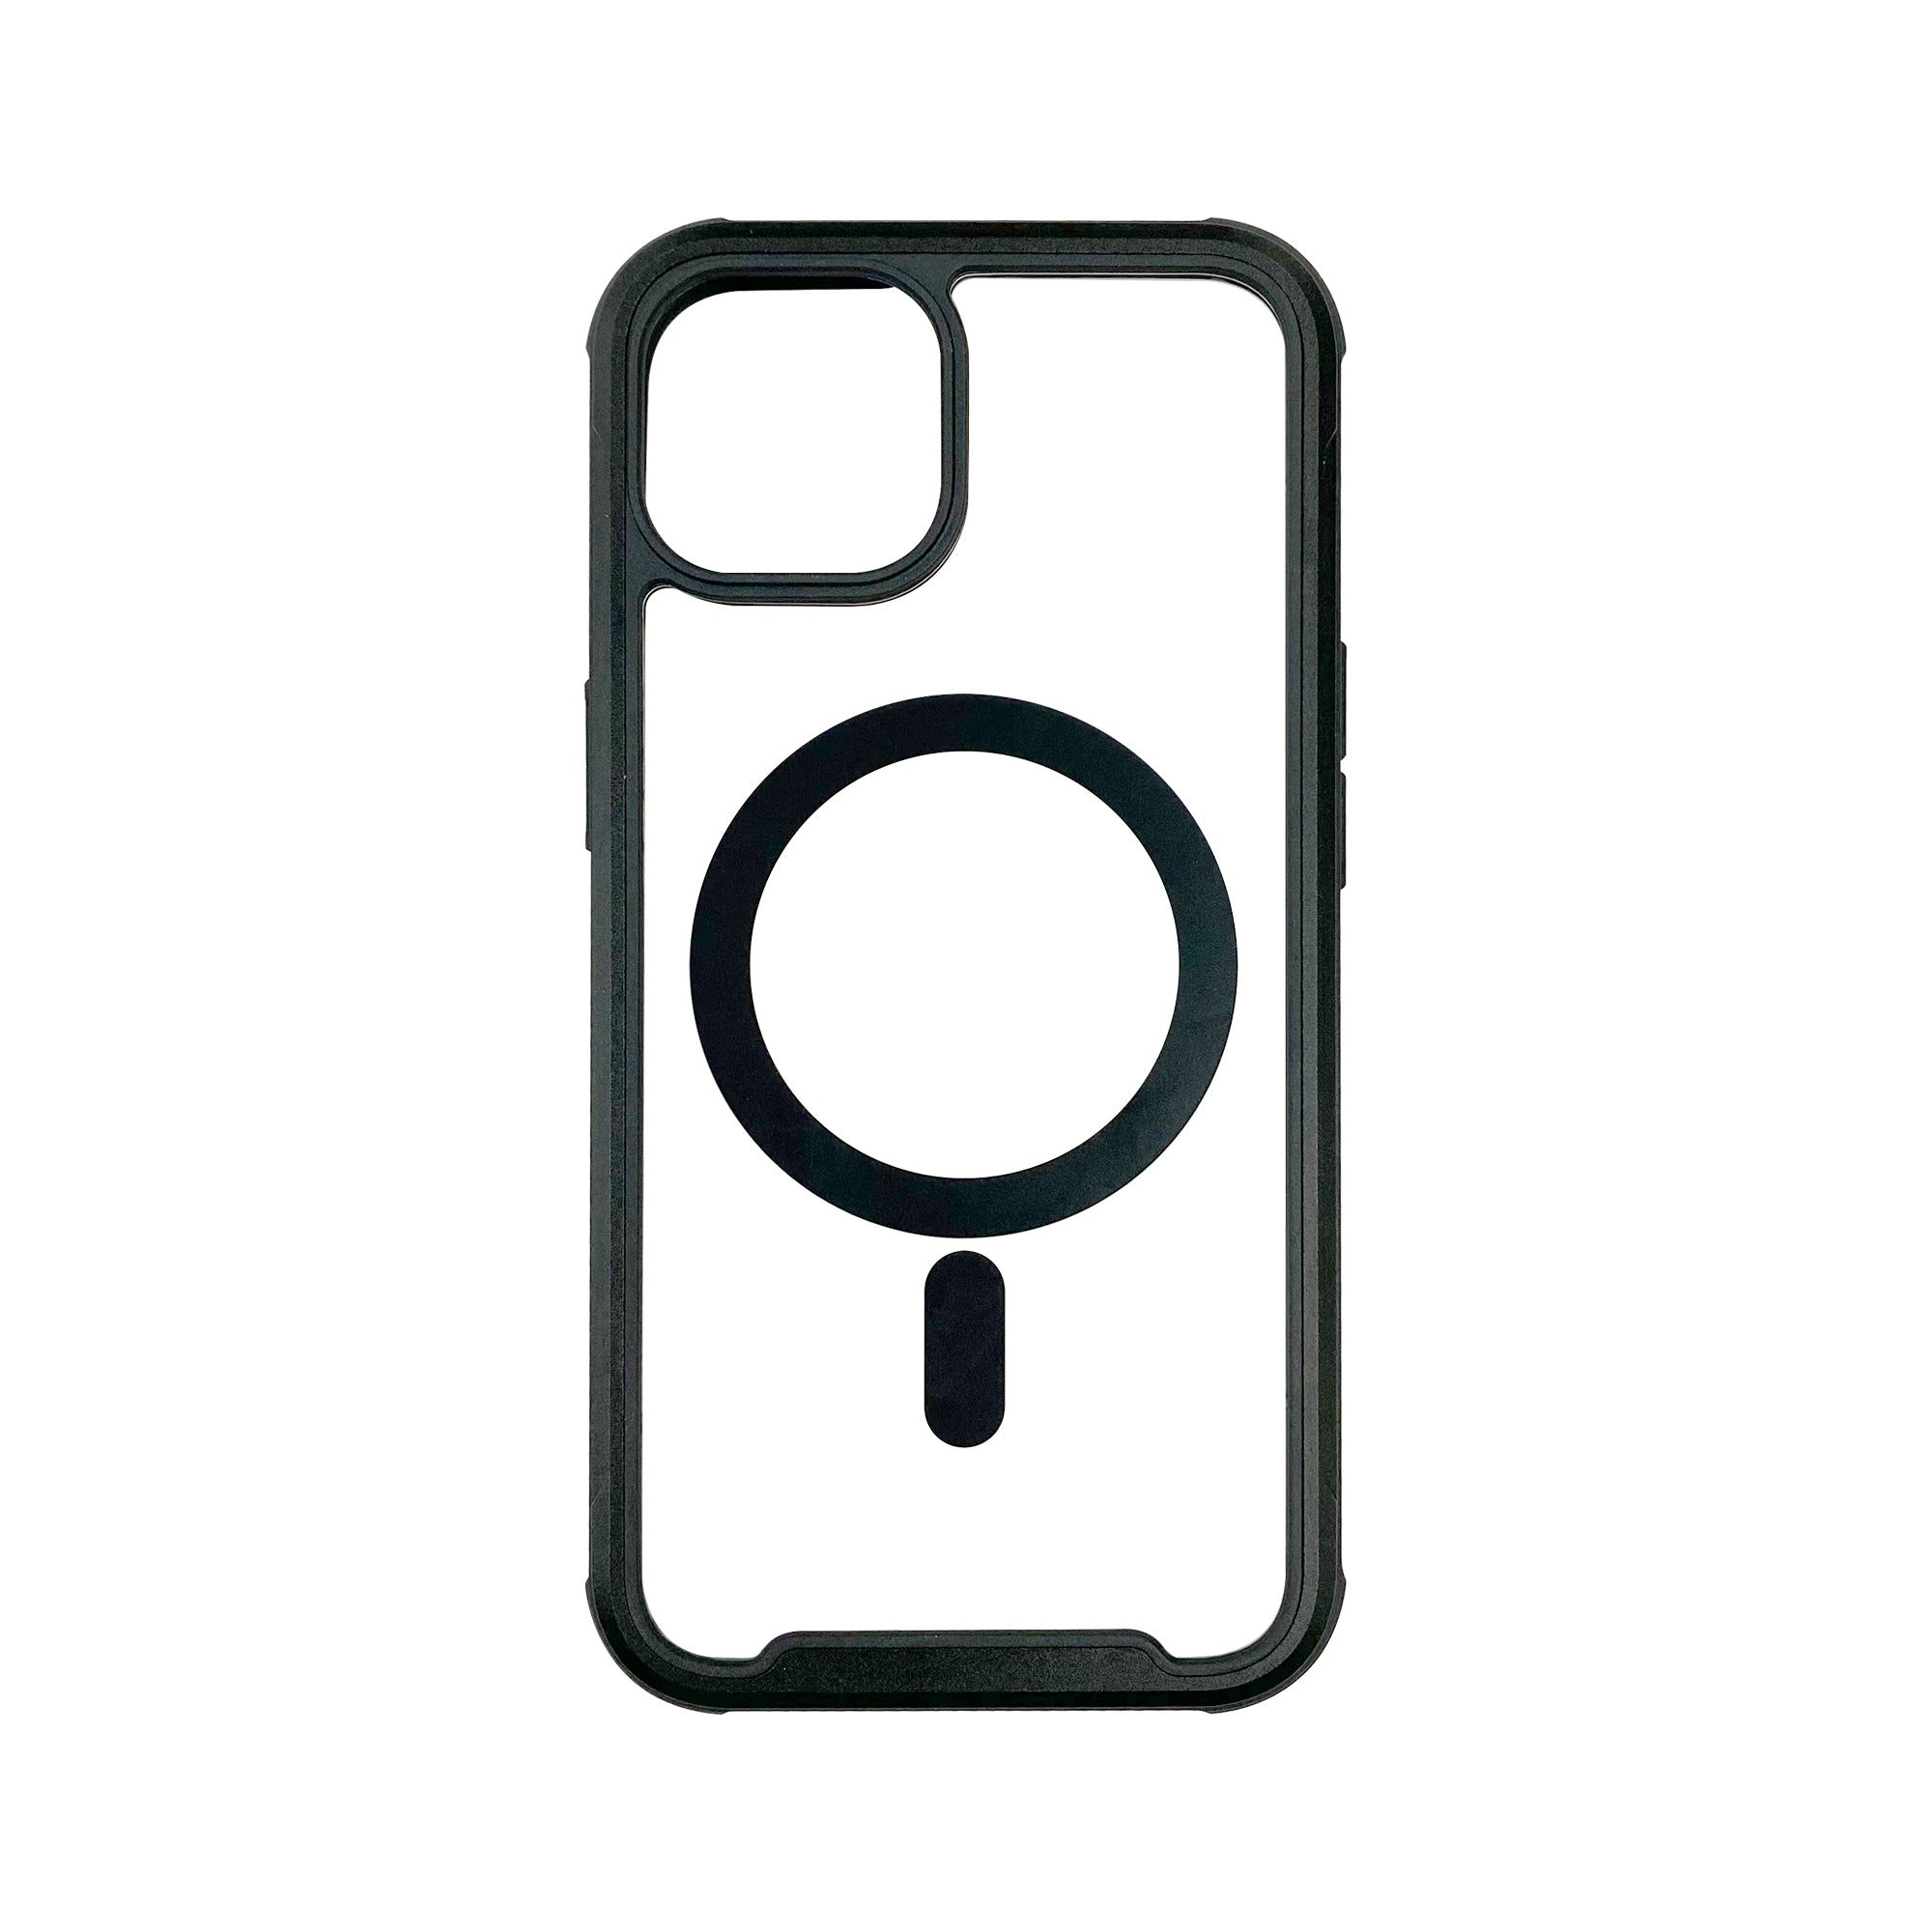 An Urban white phone case with a magnifying glass, providing both style and protection.